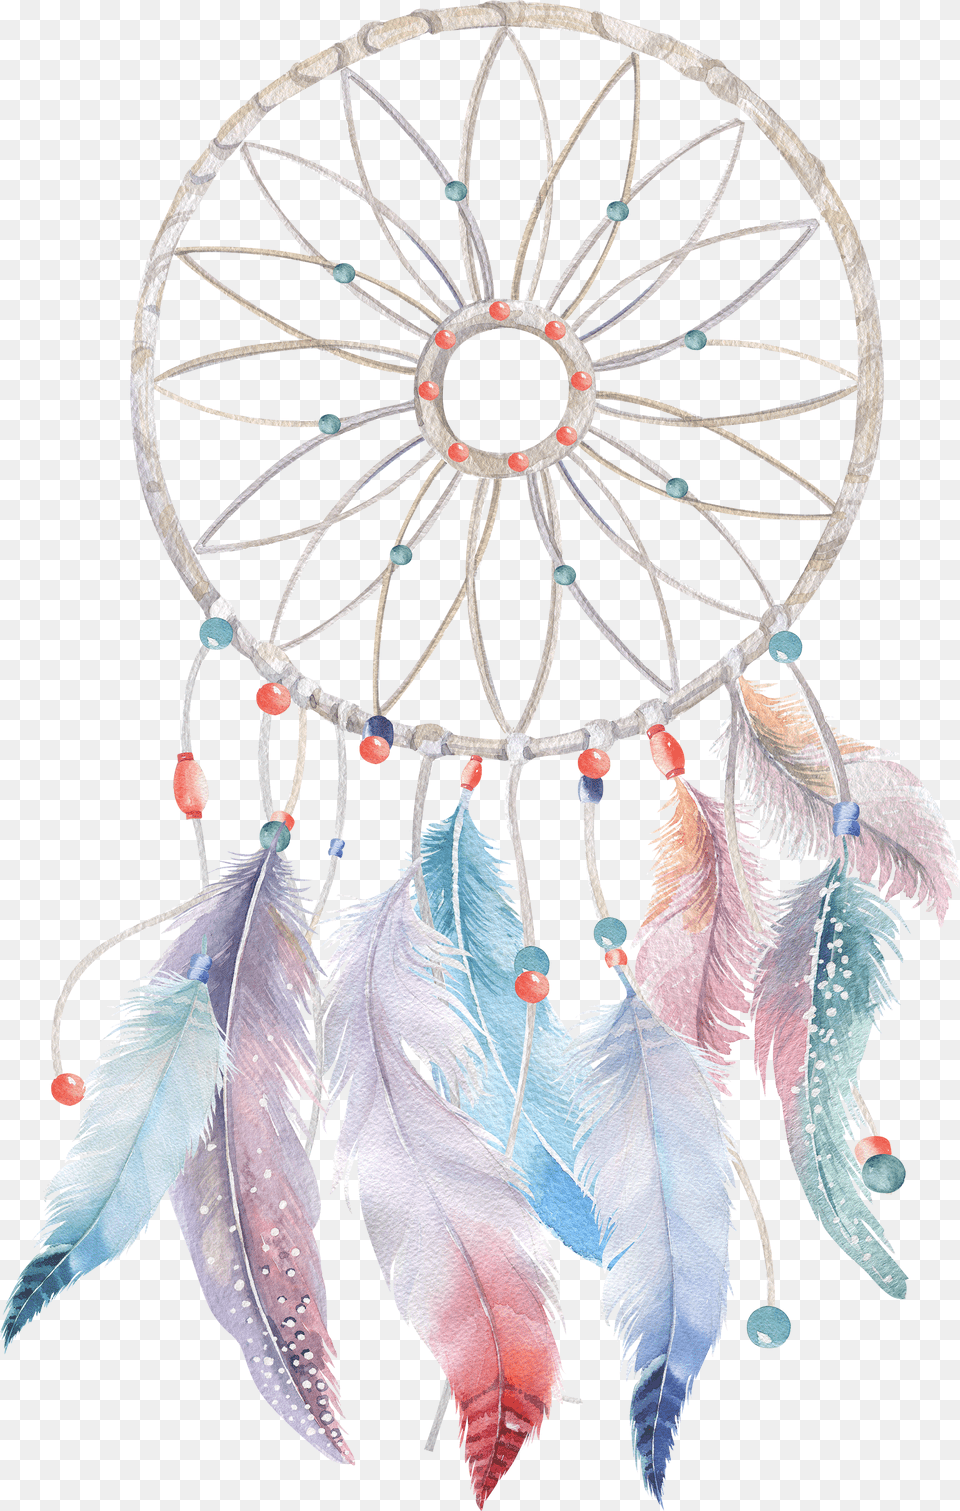 Download Watercolor Feather Boho Chic Painting Dreamcatcher Free Png